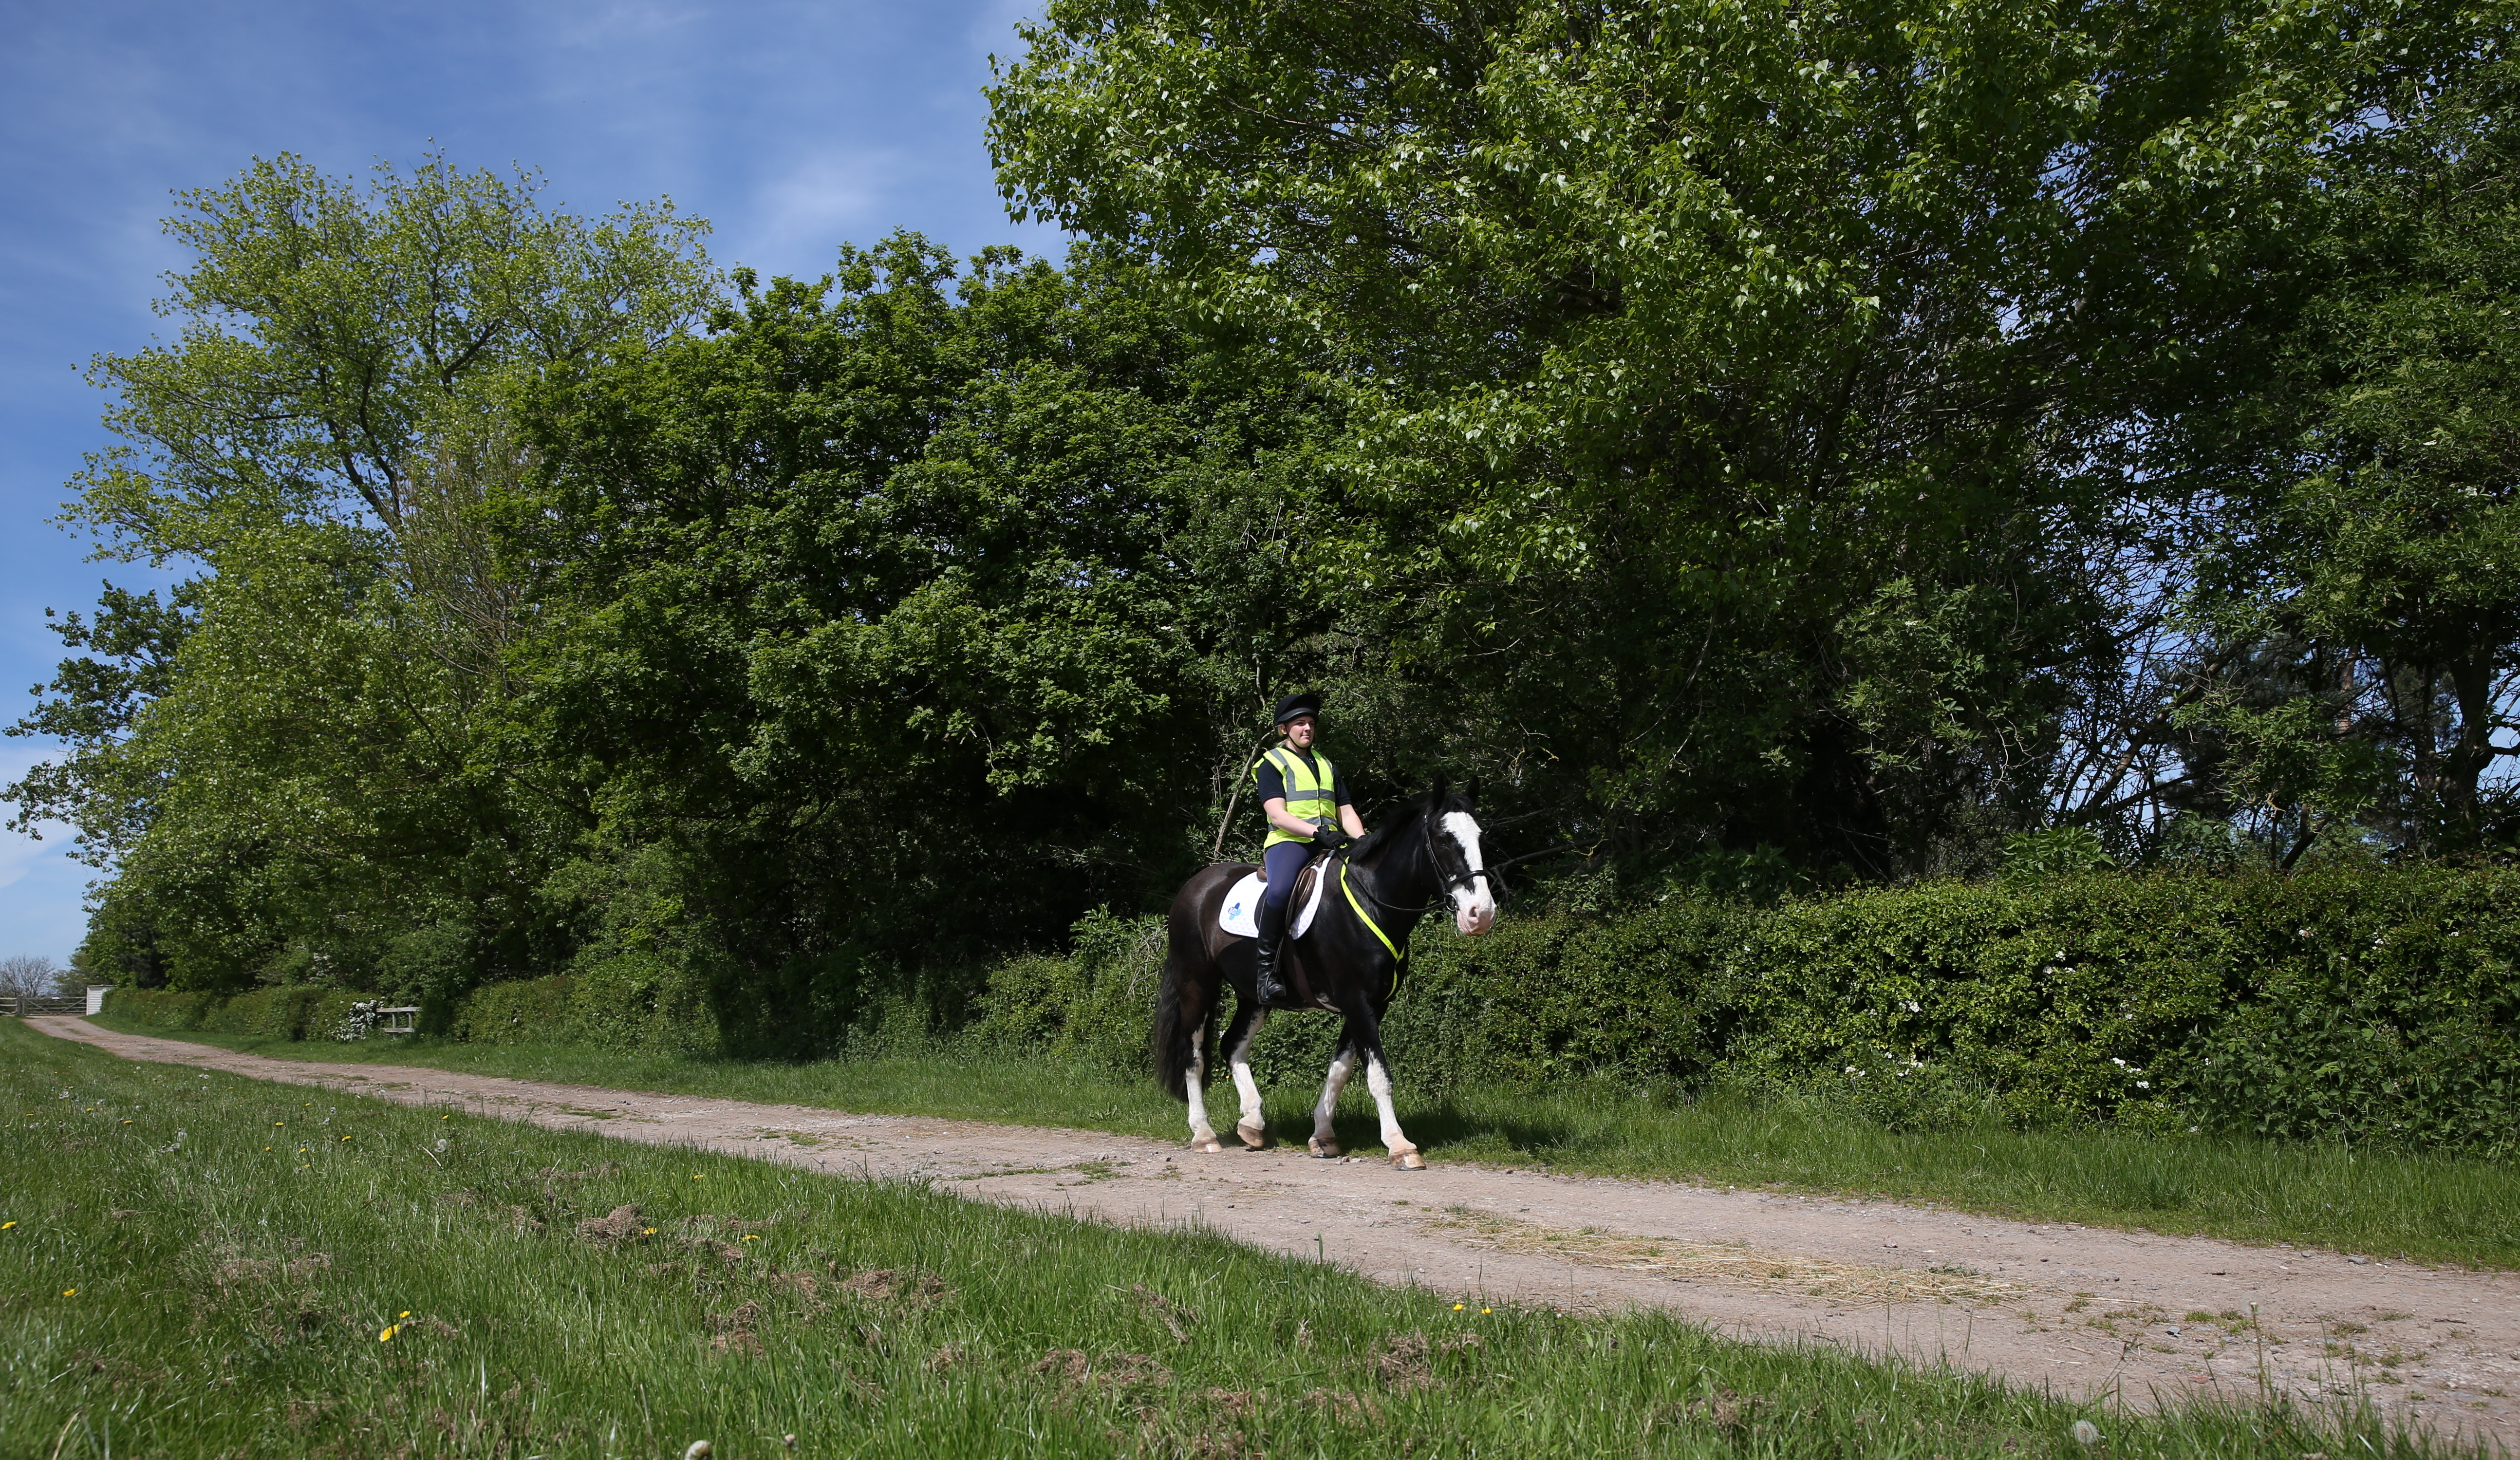 Image shows a female rider wearing a high vis jacket riding a black and white horse along a track